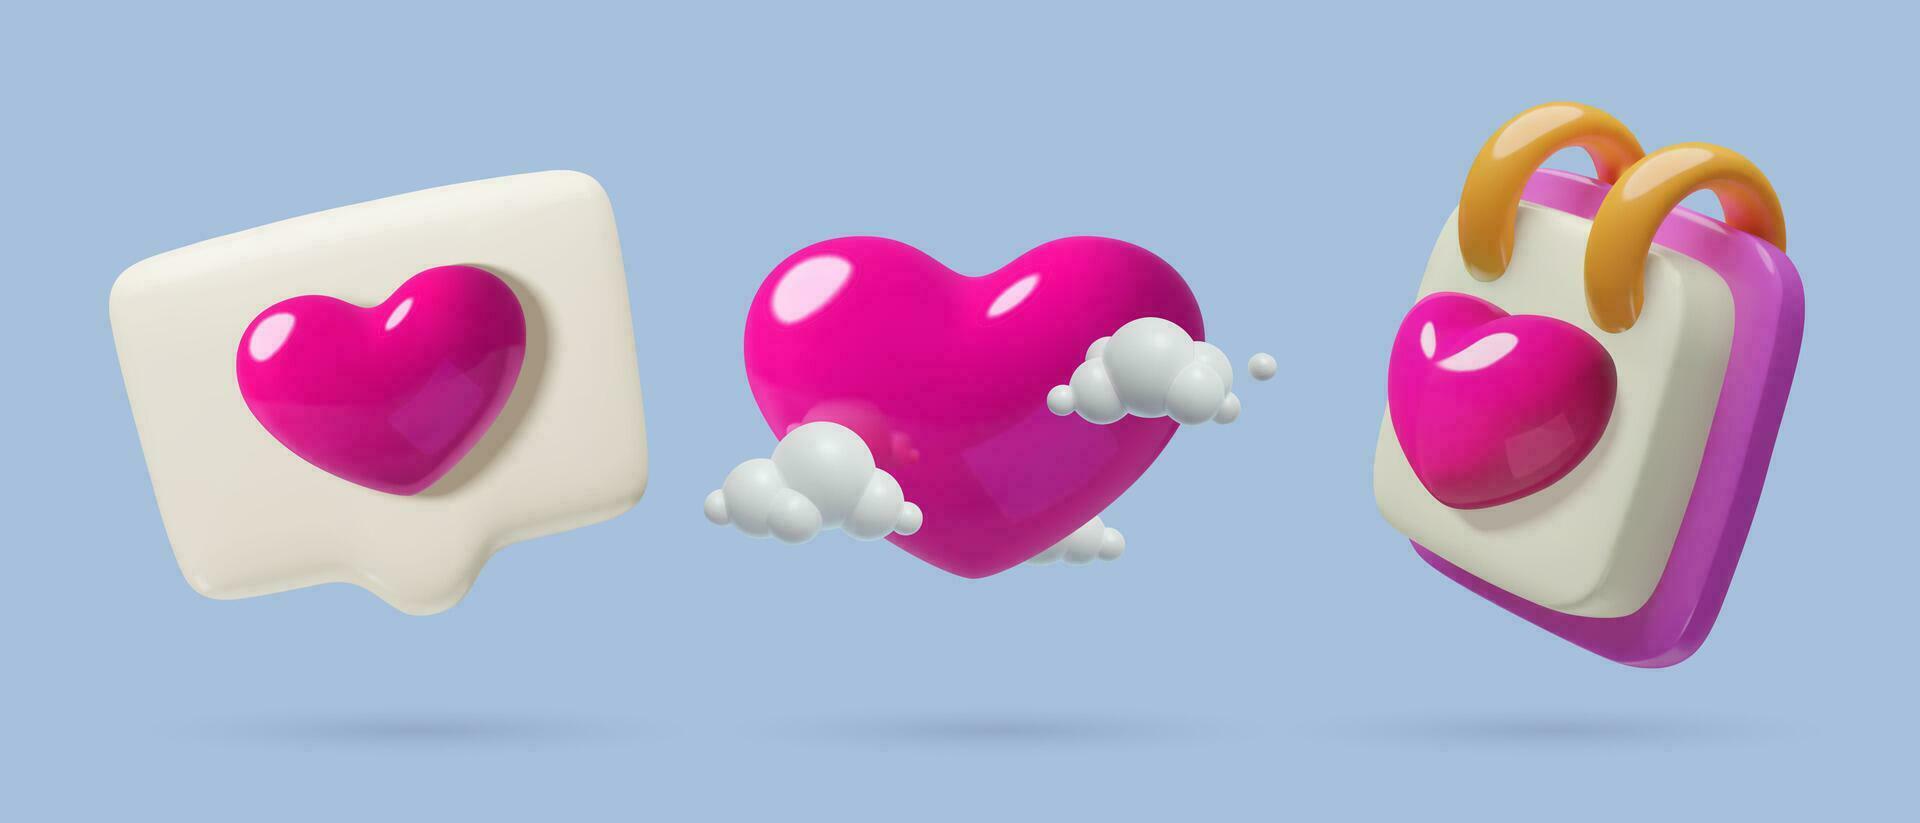 February 14 3D icons set. Valentine's Day calendar, social media speech bubble and purple heart with clouds. Romantic realistic three dimensional vector objects.